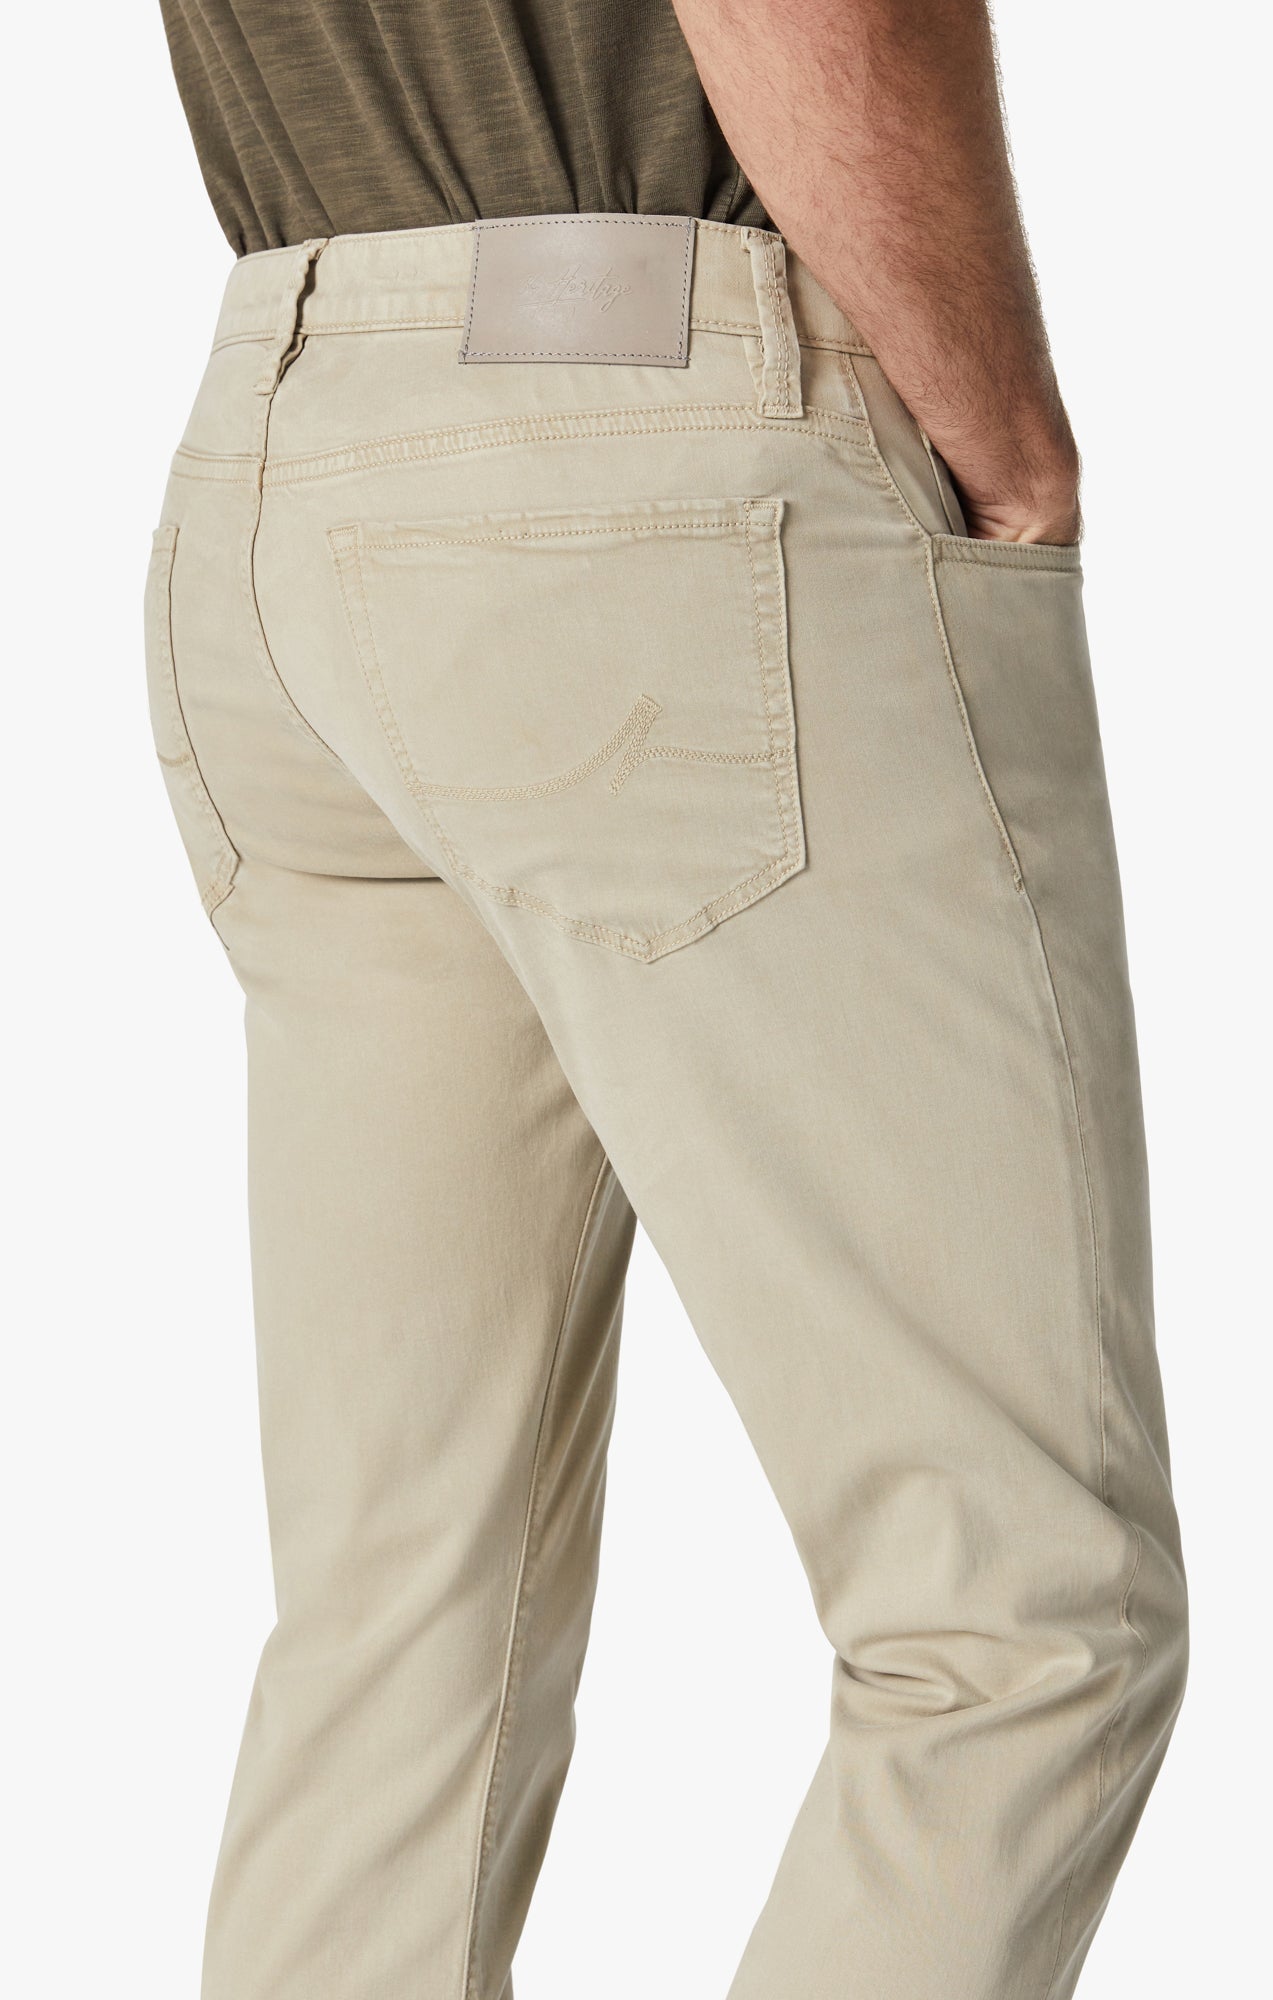 Charisma Relaxed Straight Pants In Aluminum Twill Image 5